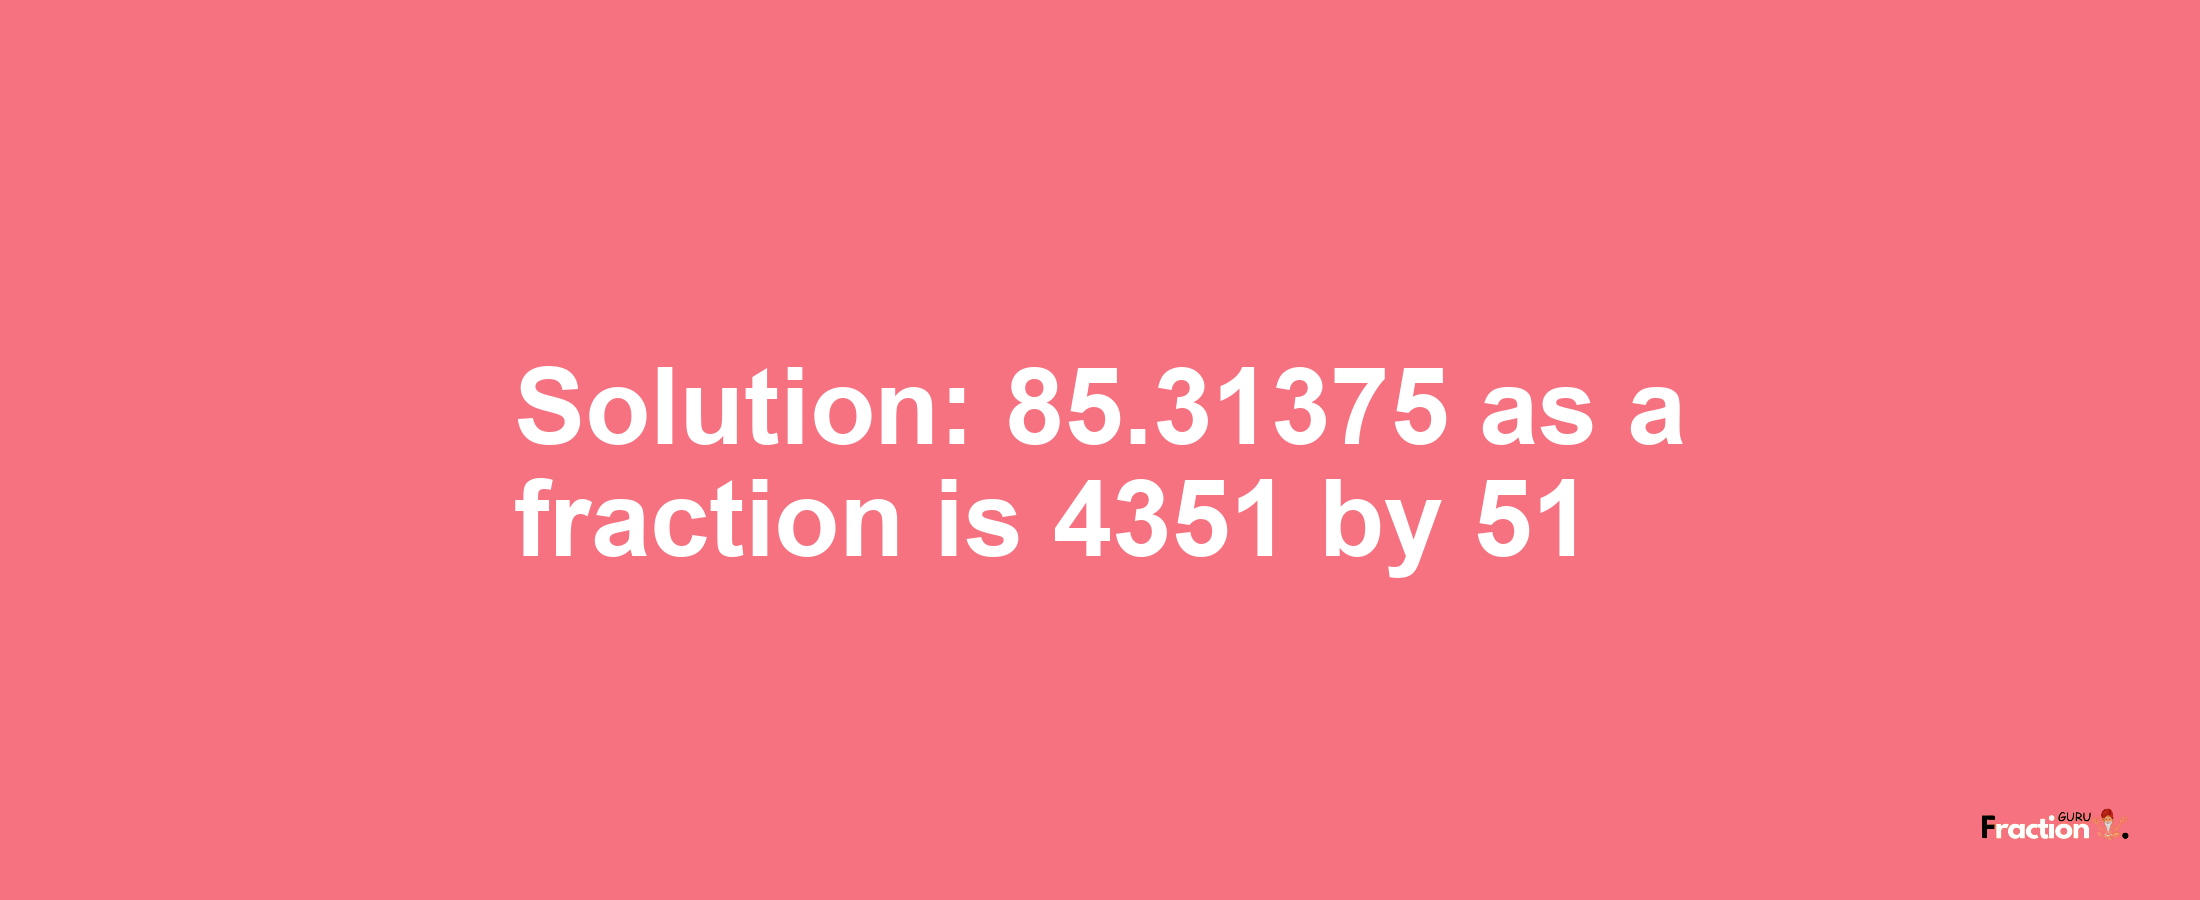 Solution:85.31375 as a fraction is 4351/51